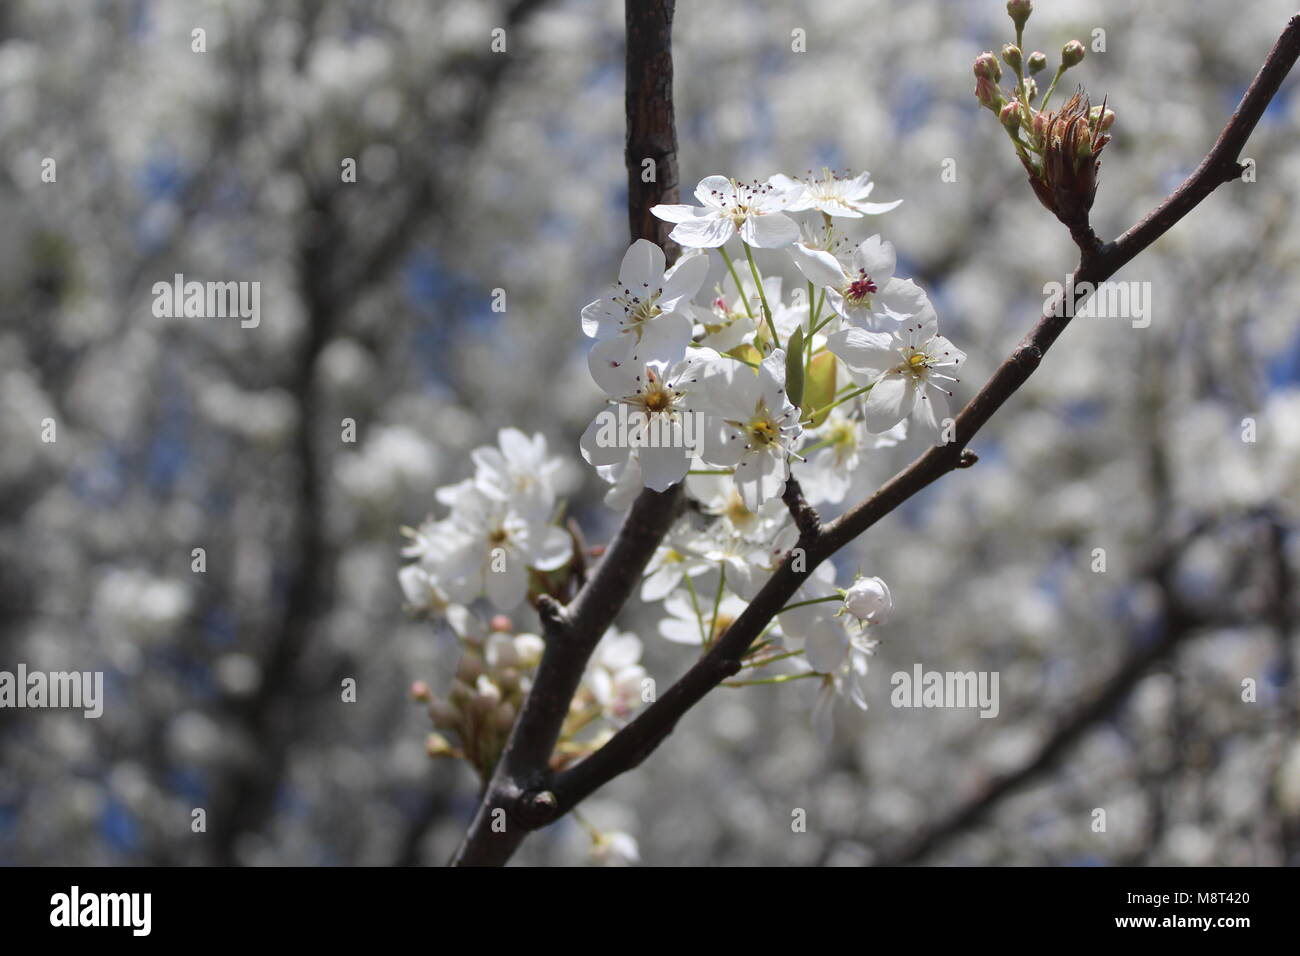 A Limb of a Pear Tree Blooming Stock Photo